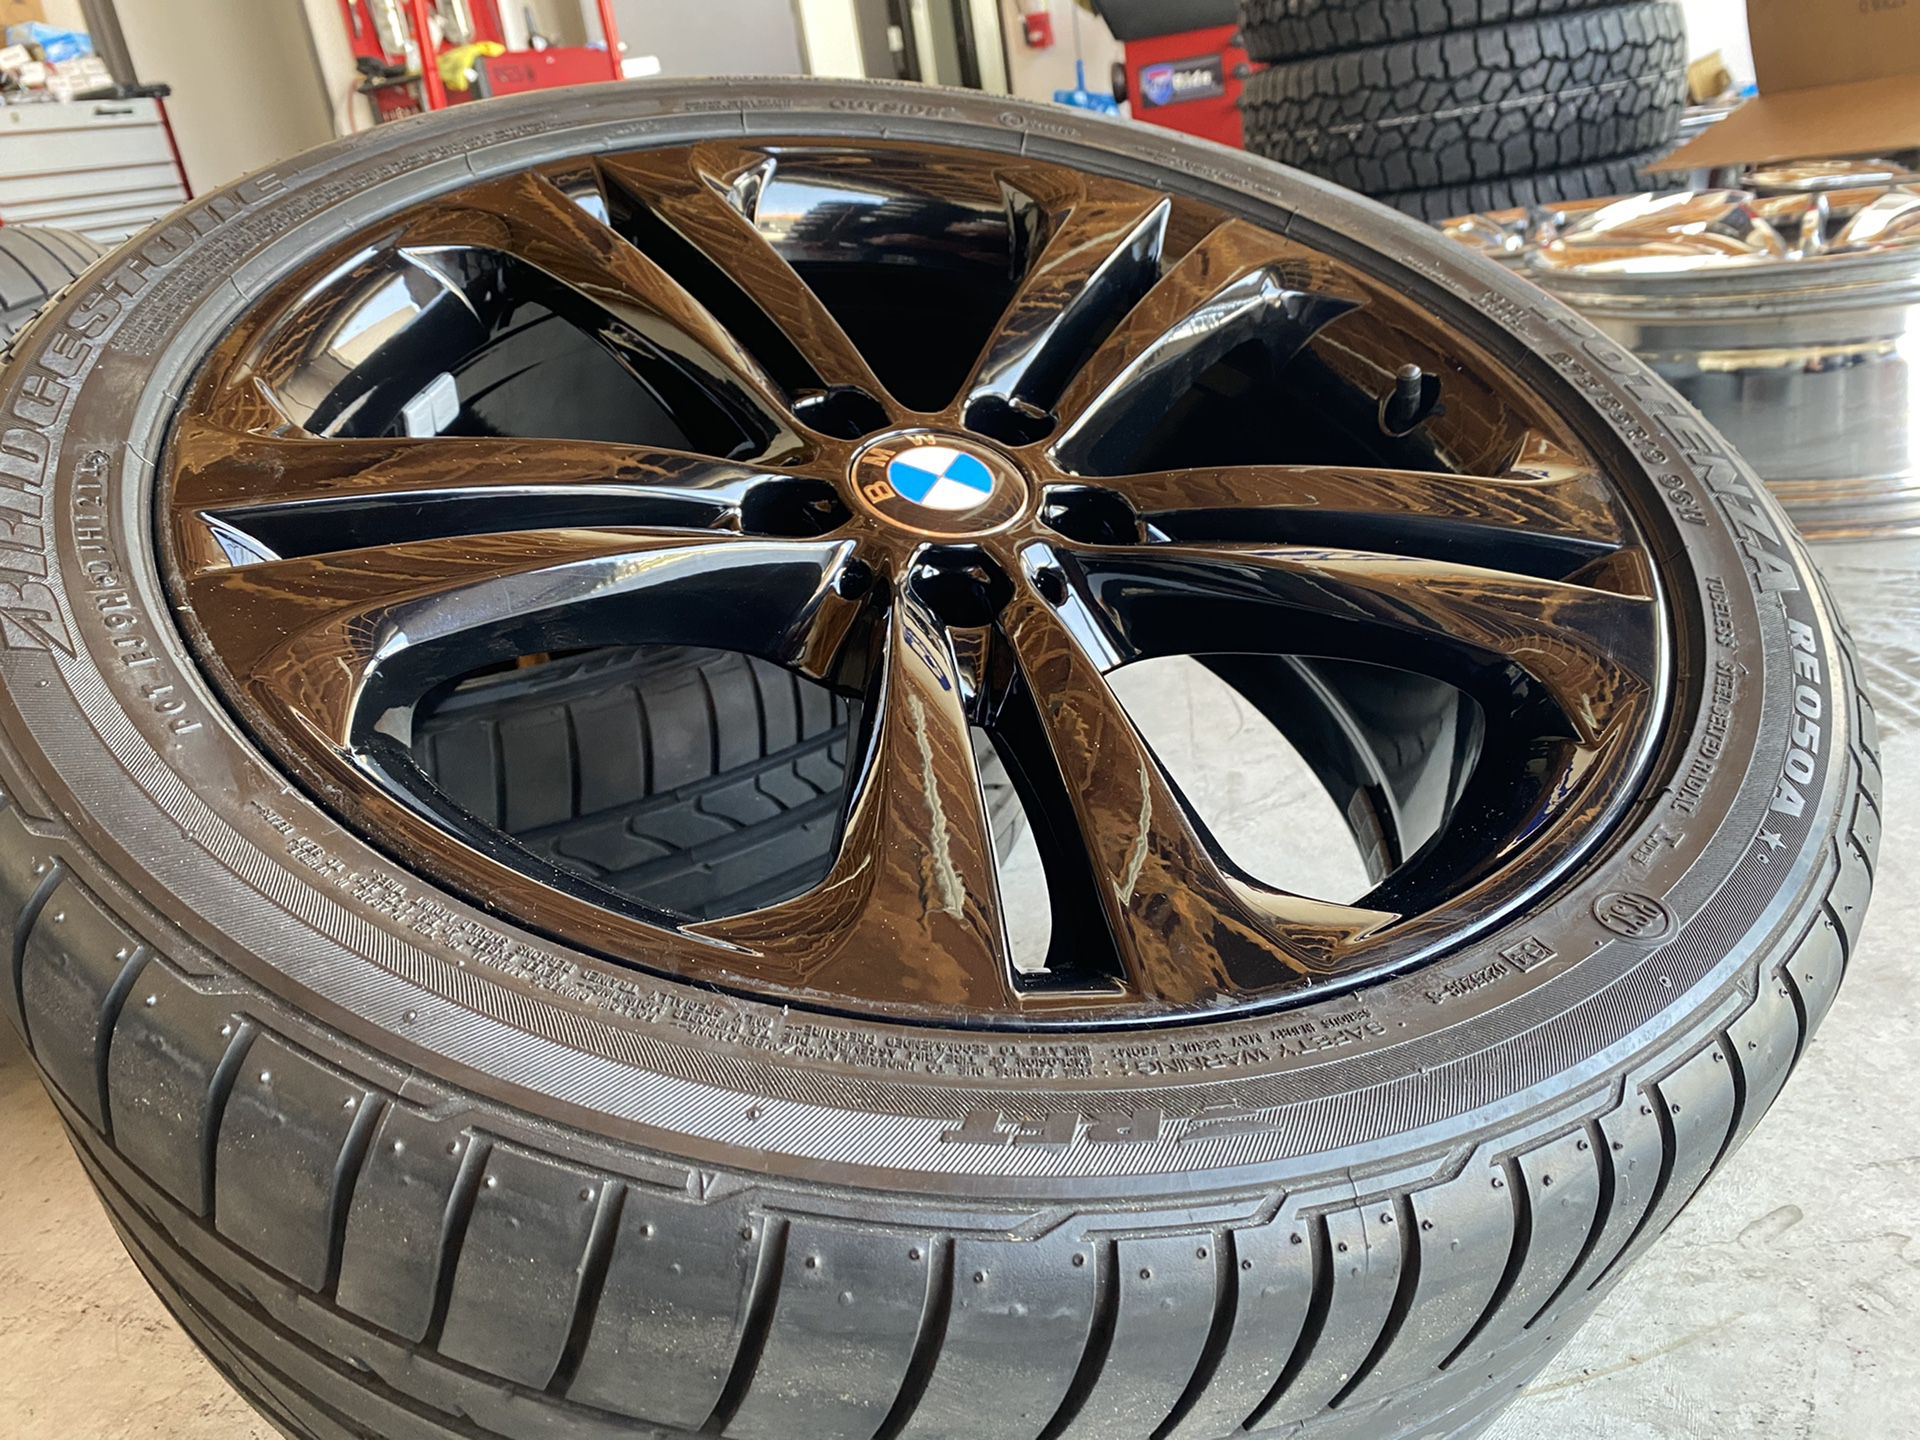 19” BMW 3 series staggered rims and tires